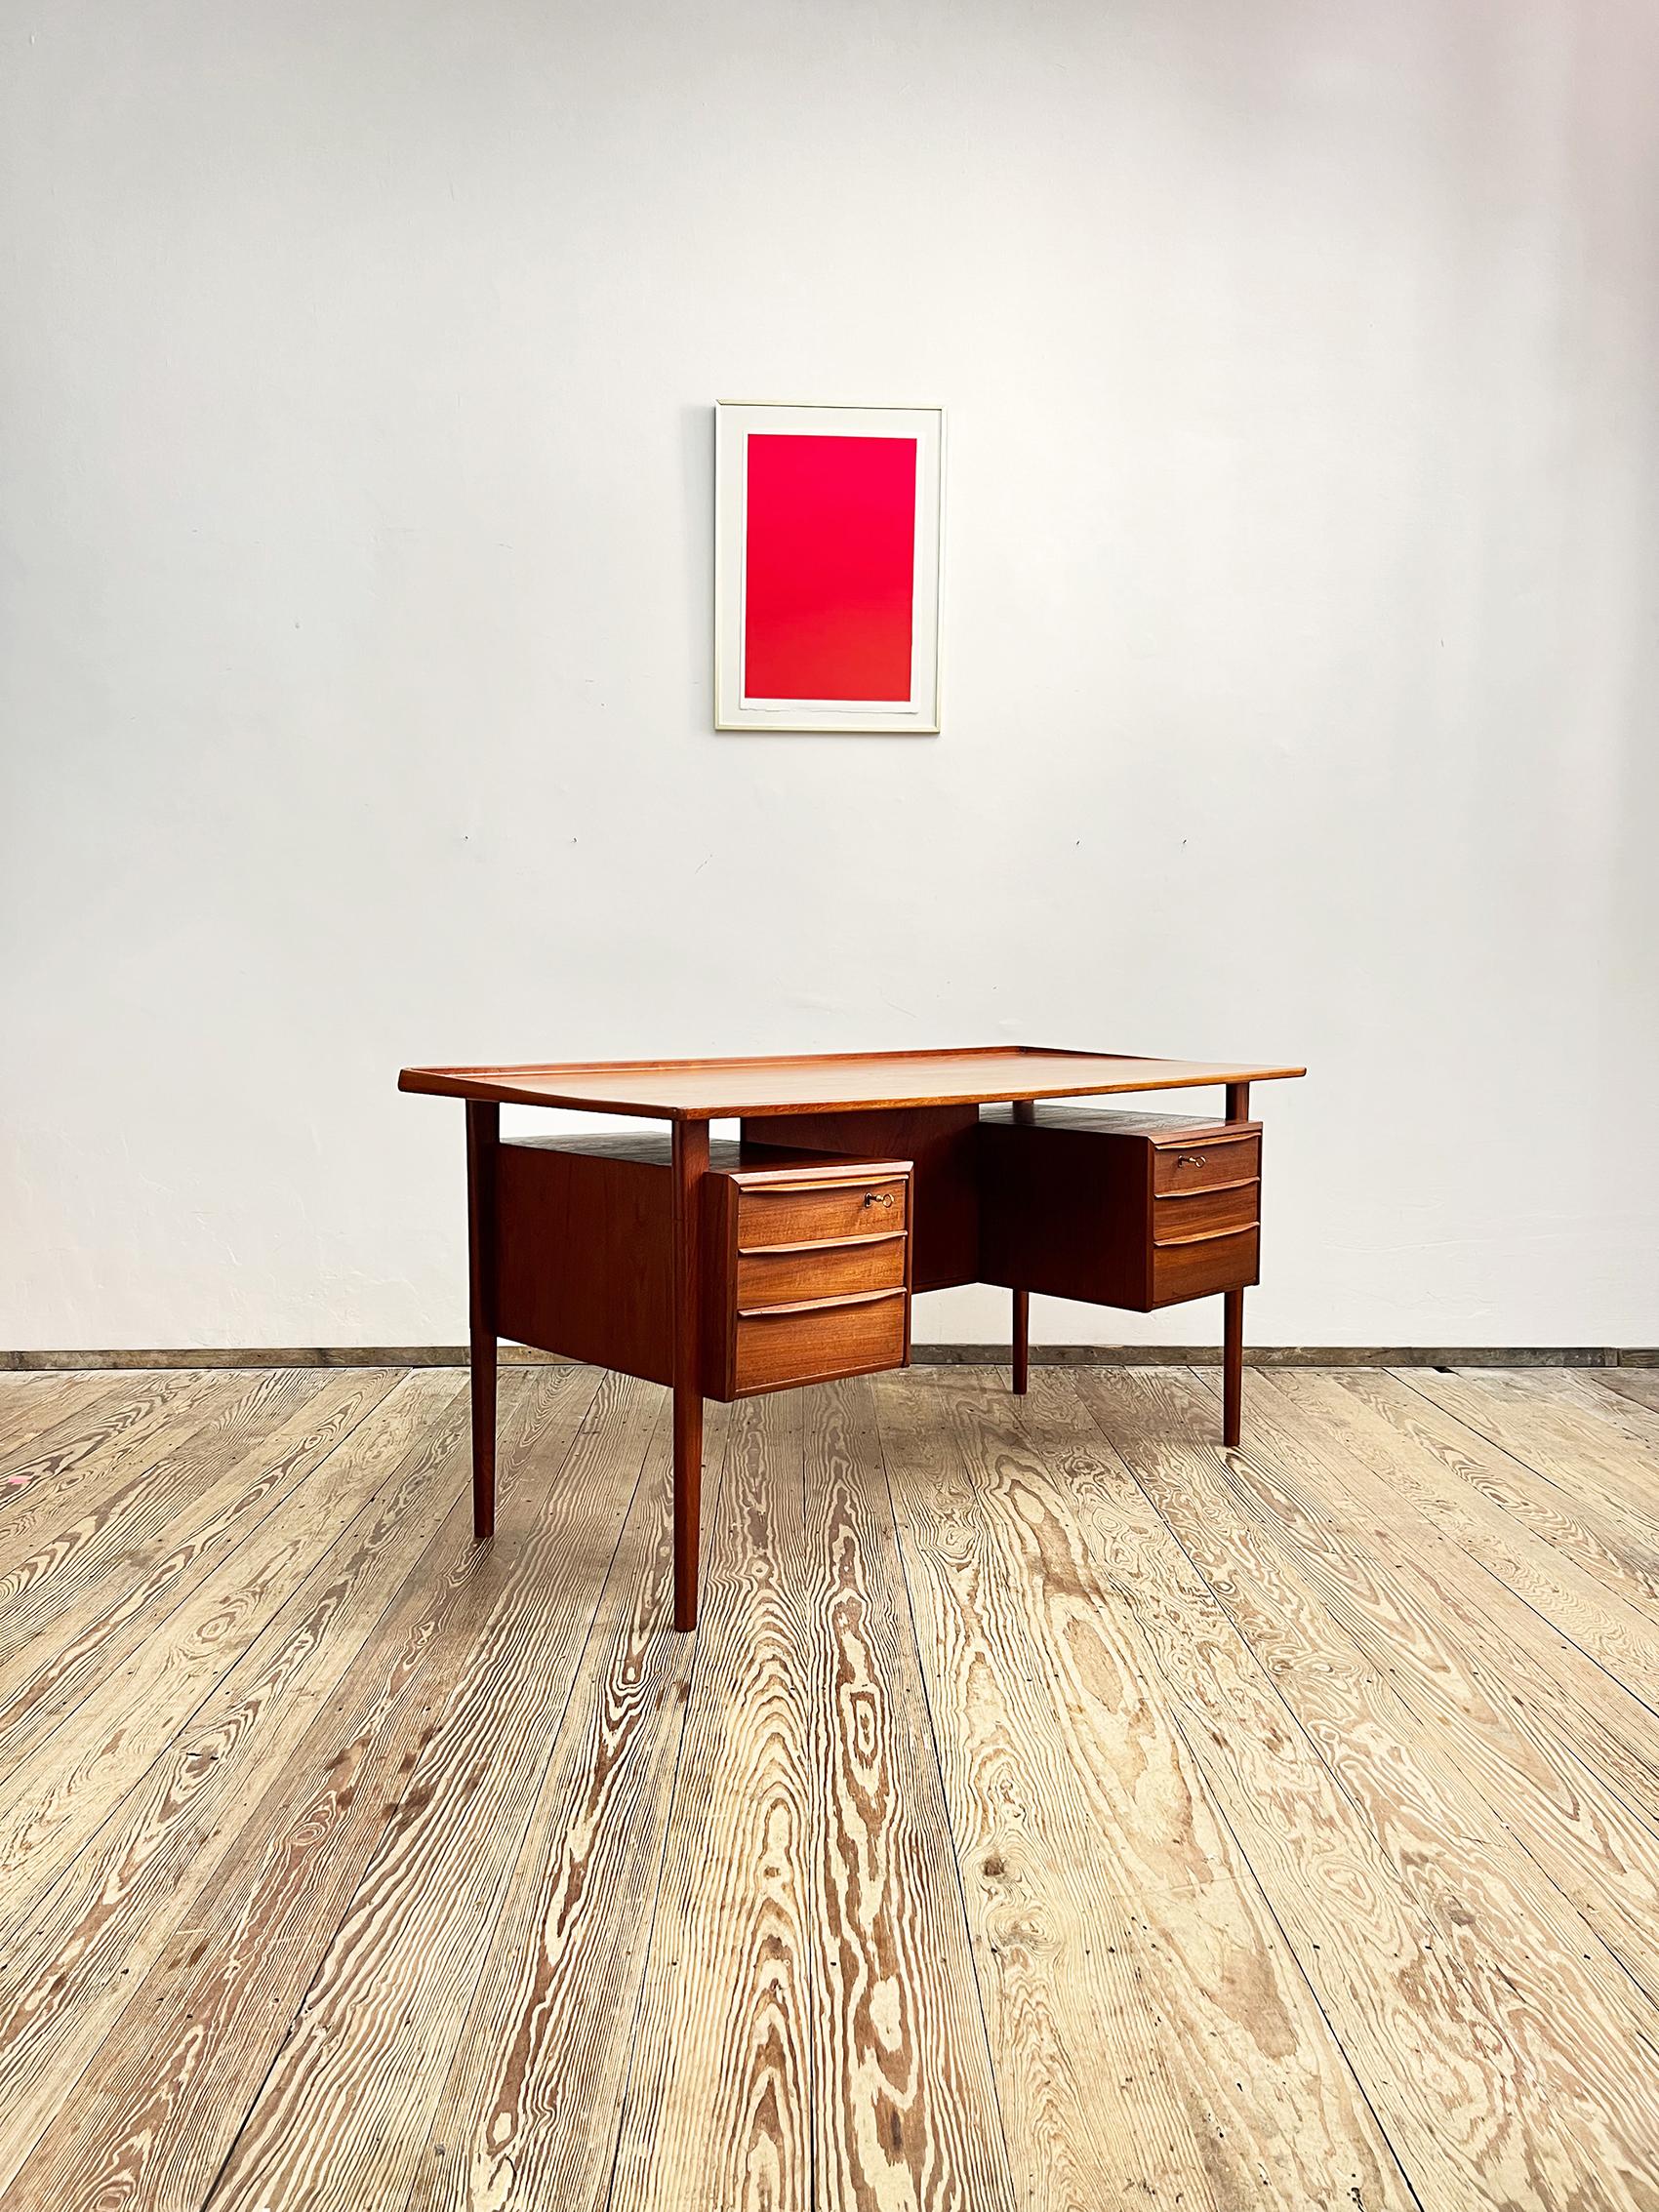 Dimensions 74 cm x 155 cm x 70 cm (Depth x Width x Height)


This free standing midcentury danish writing desk was designed by Peter Løvig Nielsen, produced by Hedensted Møbelfabrik Denmark in 1970. The table is made of teak wood and features two